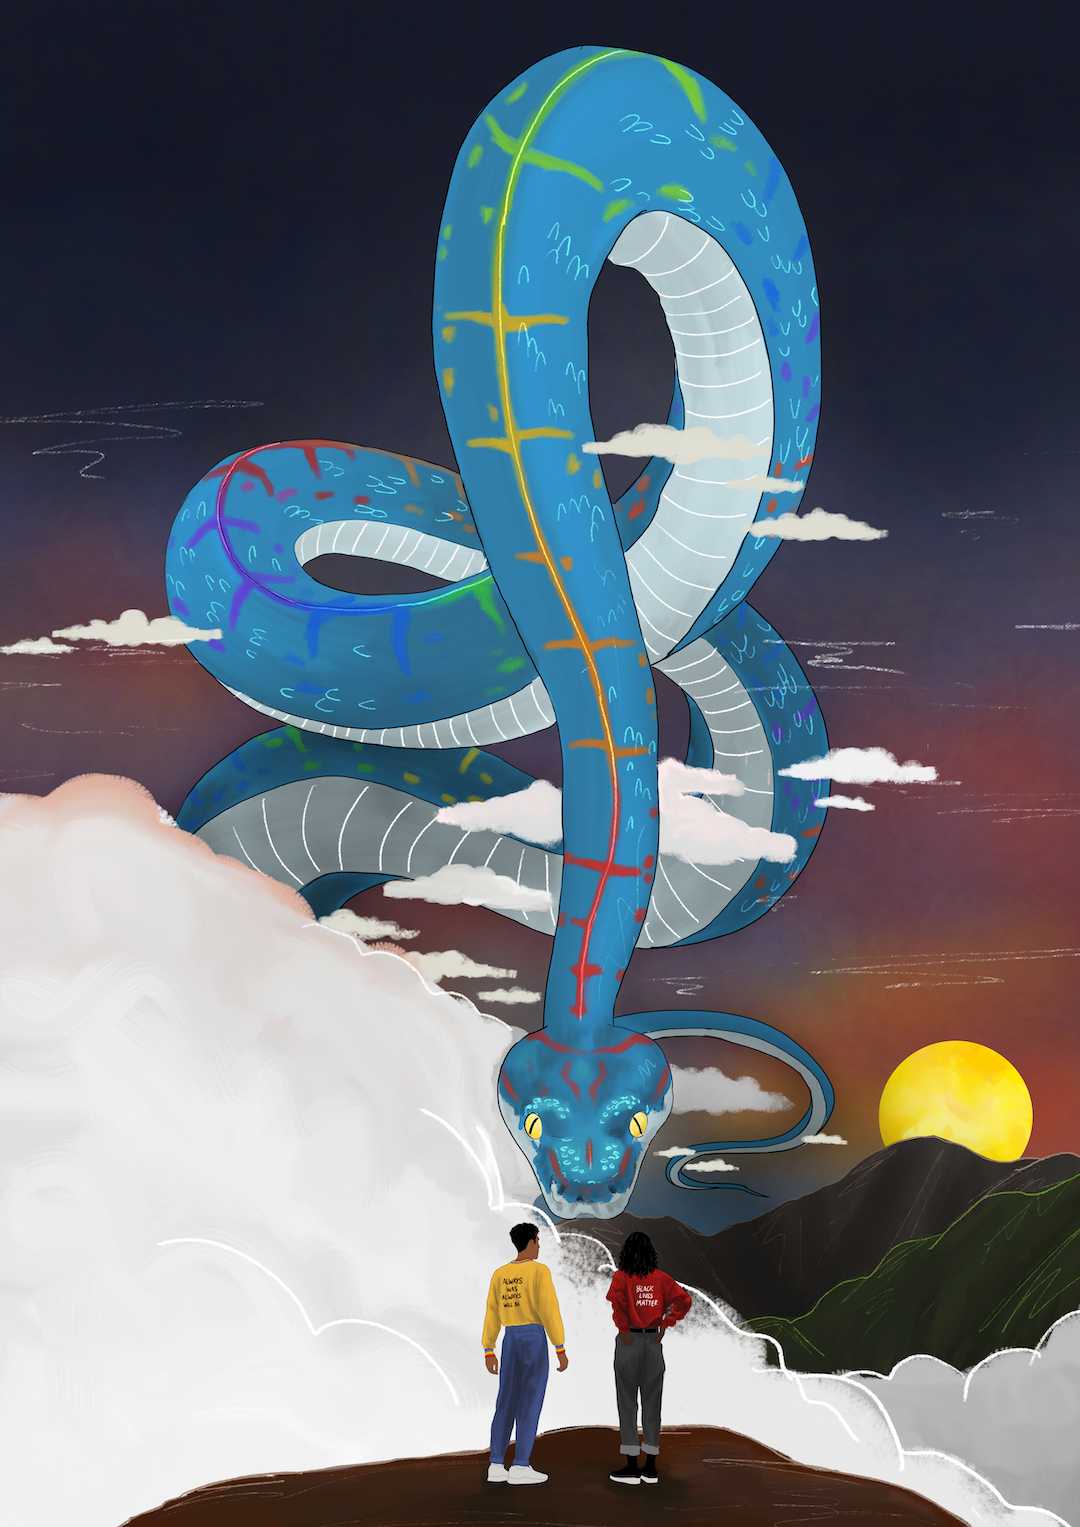 A giant spirit snake floats above two figures in a dreamscape